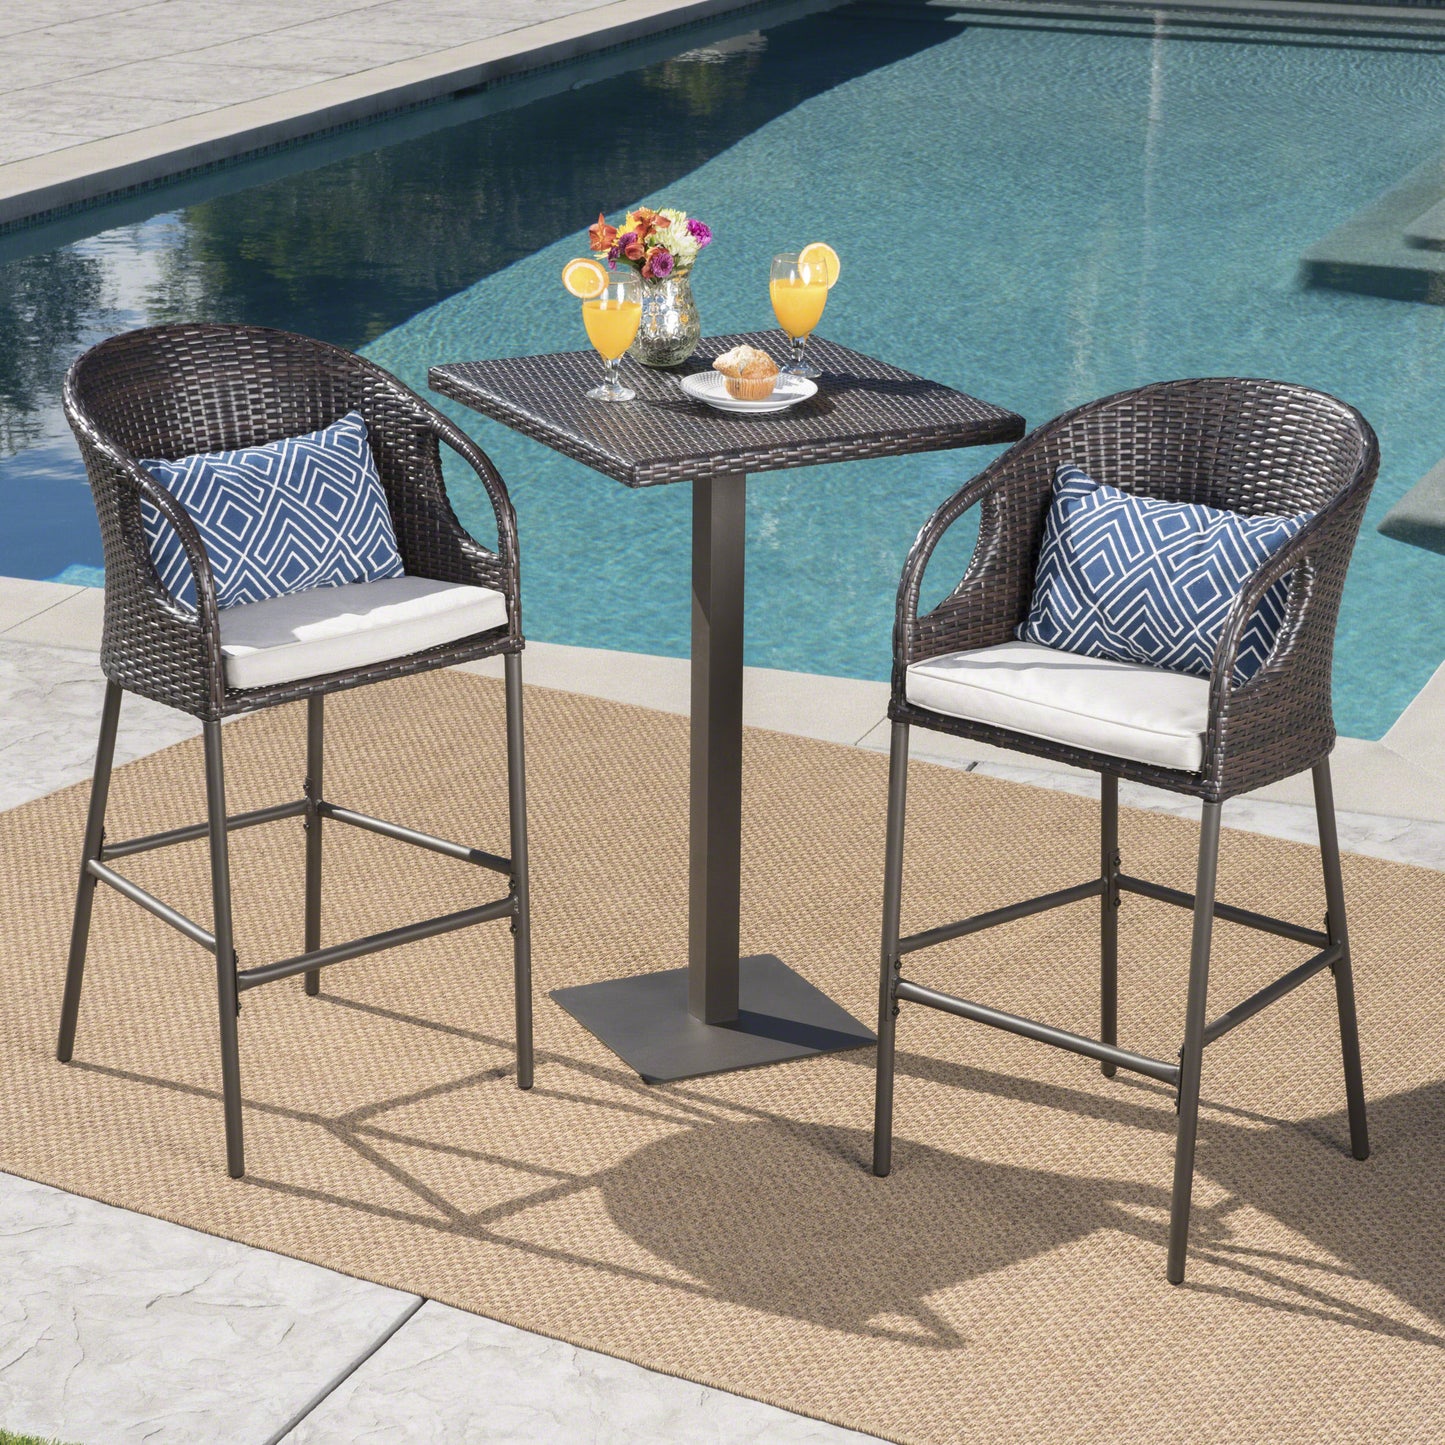 Big Rock Outdoor 3 Piece Wicker Bar Set with Water Resistant Cushions